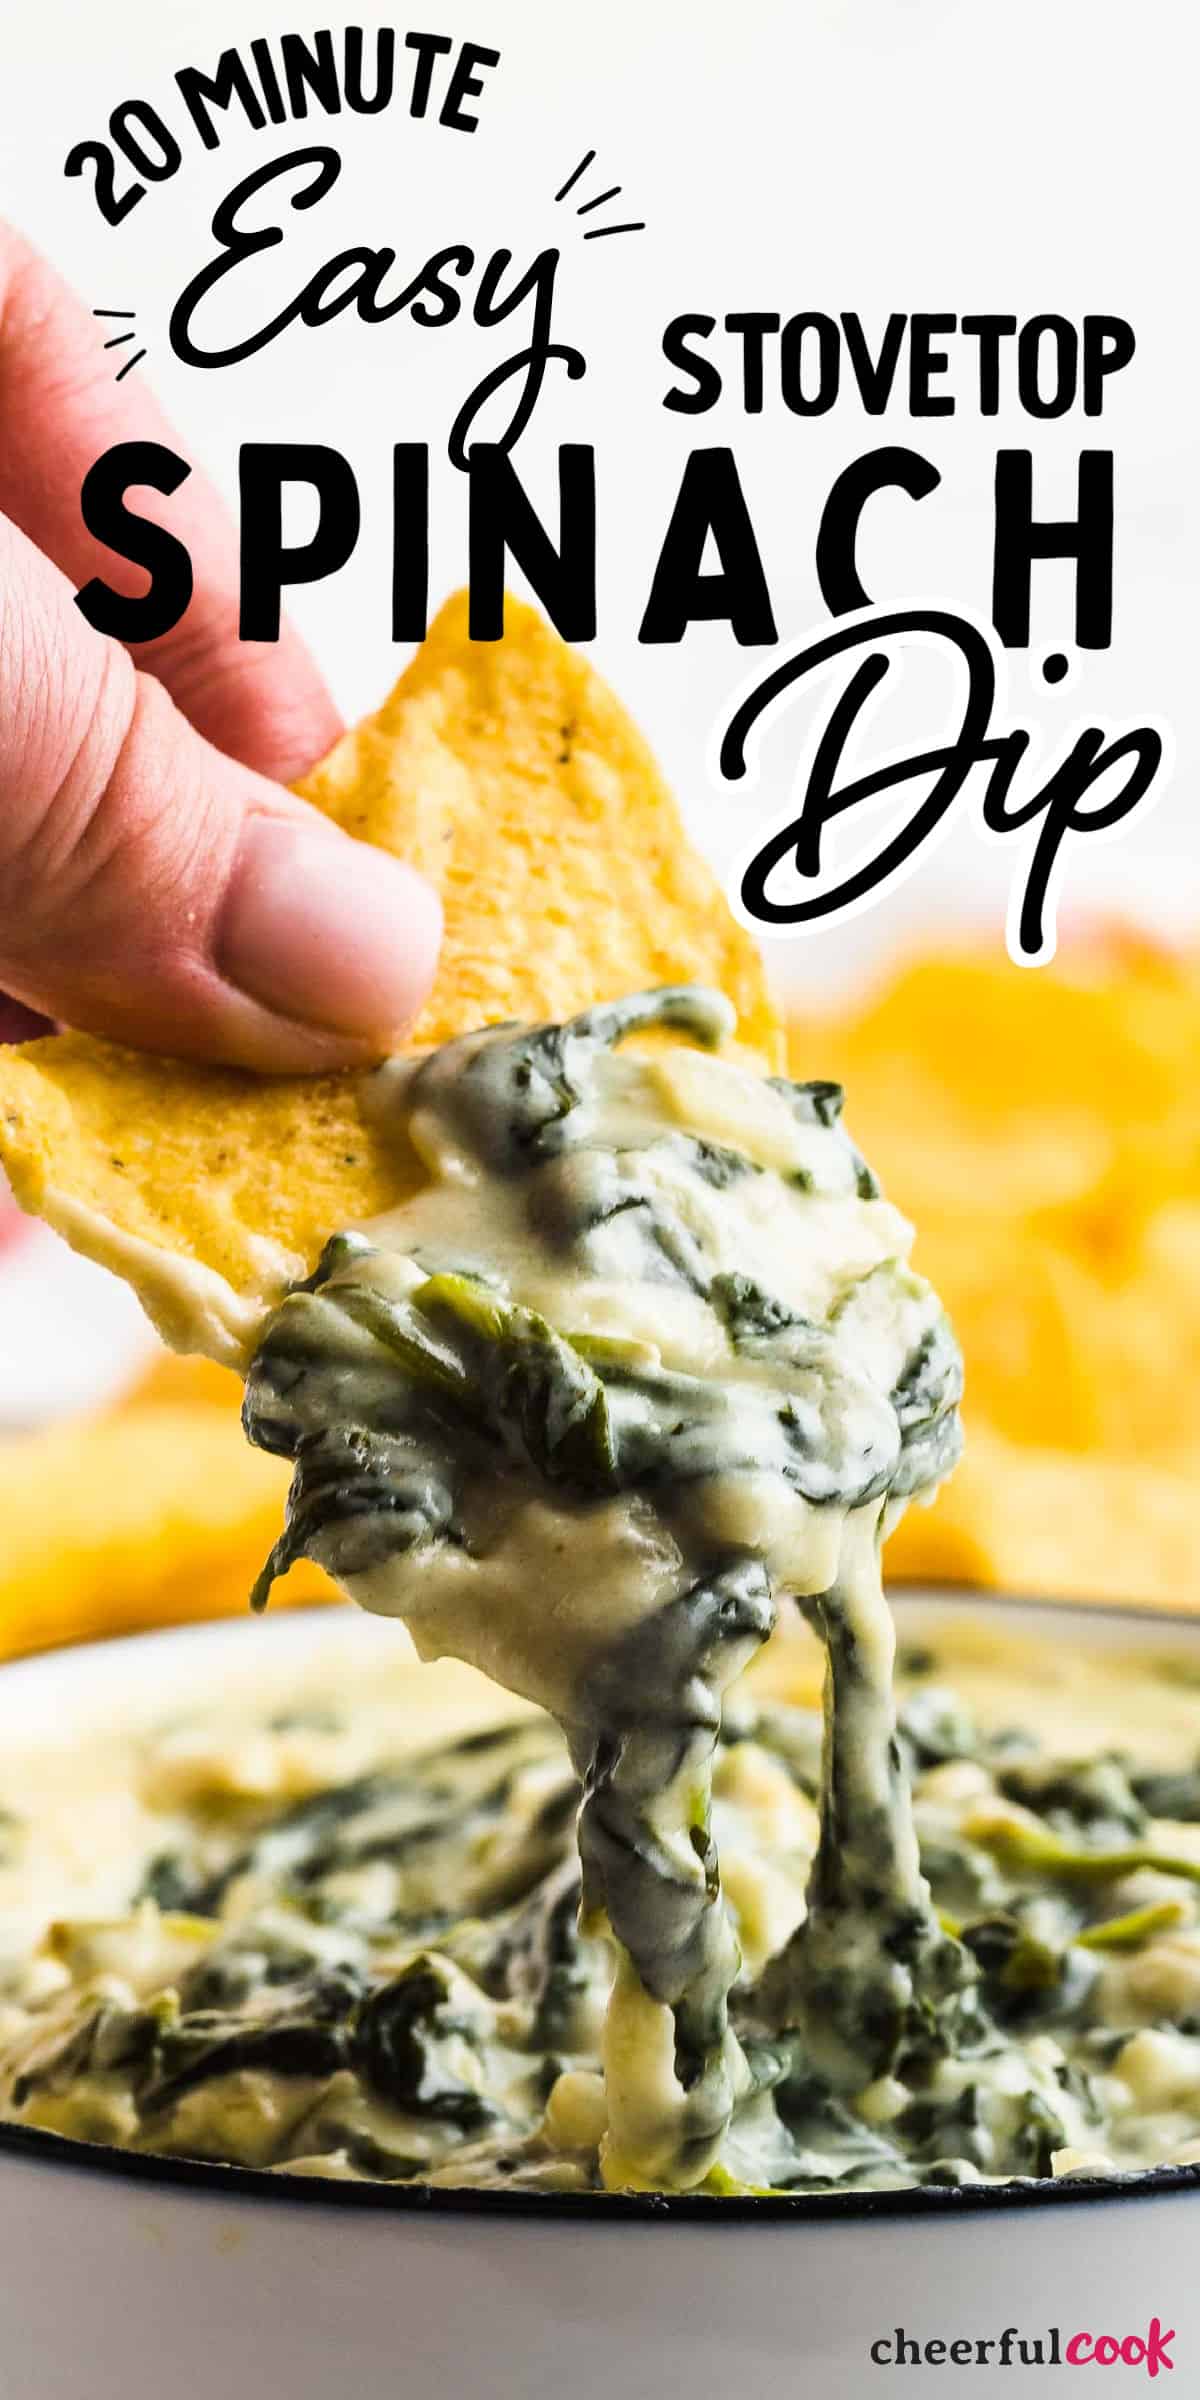 There's a reason Spinach Dip is such a popular party dip. Using just simple and fresh ingredients takes this classic party dip to the next level. Rich and creamy, this spinach dip is perfect for dipping tortilla chips or (oven-roasted) sliced baguette. #cheerfulcook #appetizer #dip #shared #recipe ♡ cheerfulcook.com via @cheerfulcook